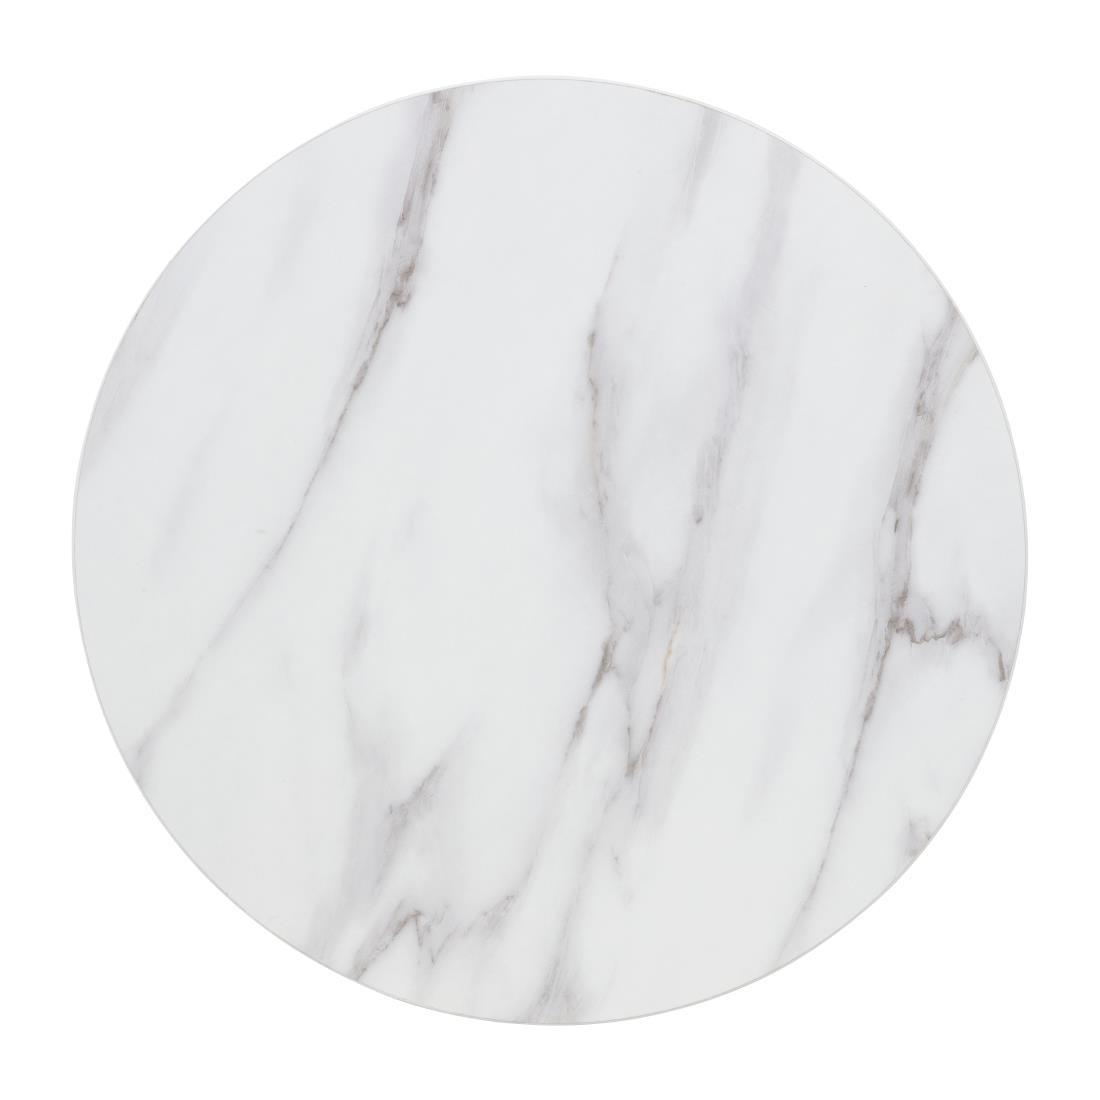 Bolero Pre-drilled Round Table Top Marble Effect 600mm - DT445  - 1